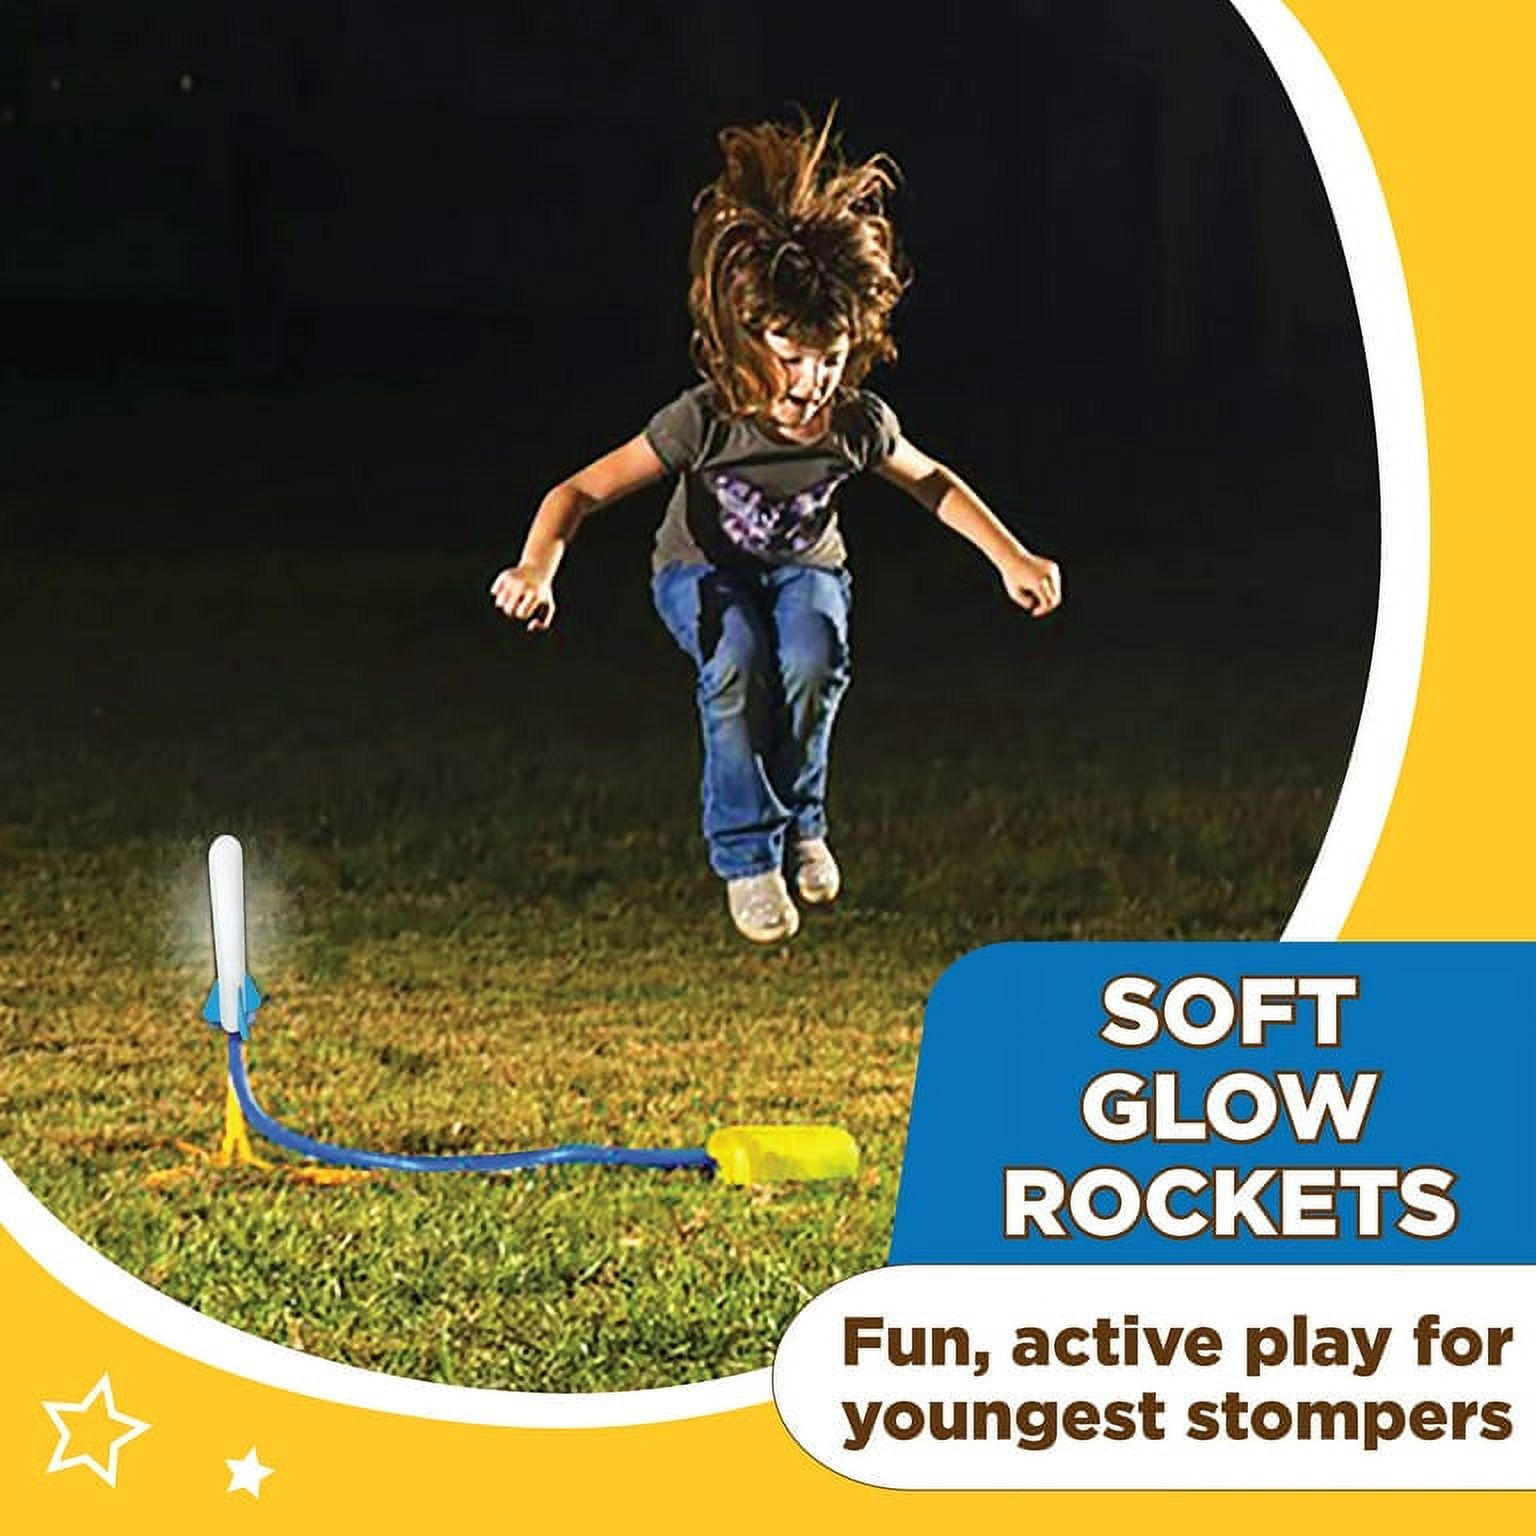 Stomp Rocket® Original Jr. Glow Rocket Launcher for Kids, Soars up to 100 Ft, 4 Foam Rockets and Adjustable Launcher, Gift for Boys and Girls Ages 3 Years and up - image 5 of 8